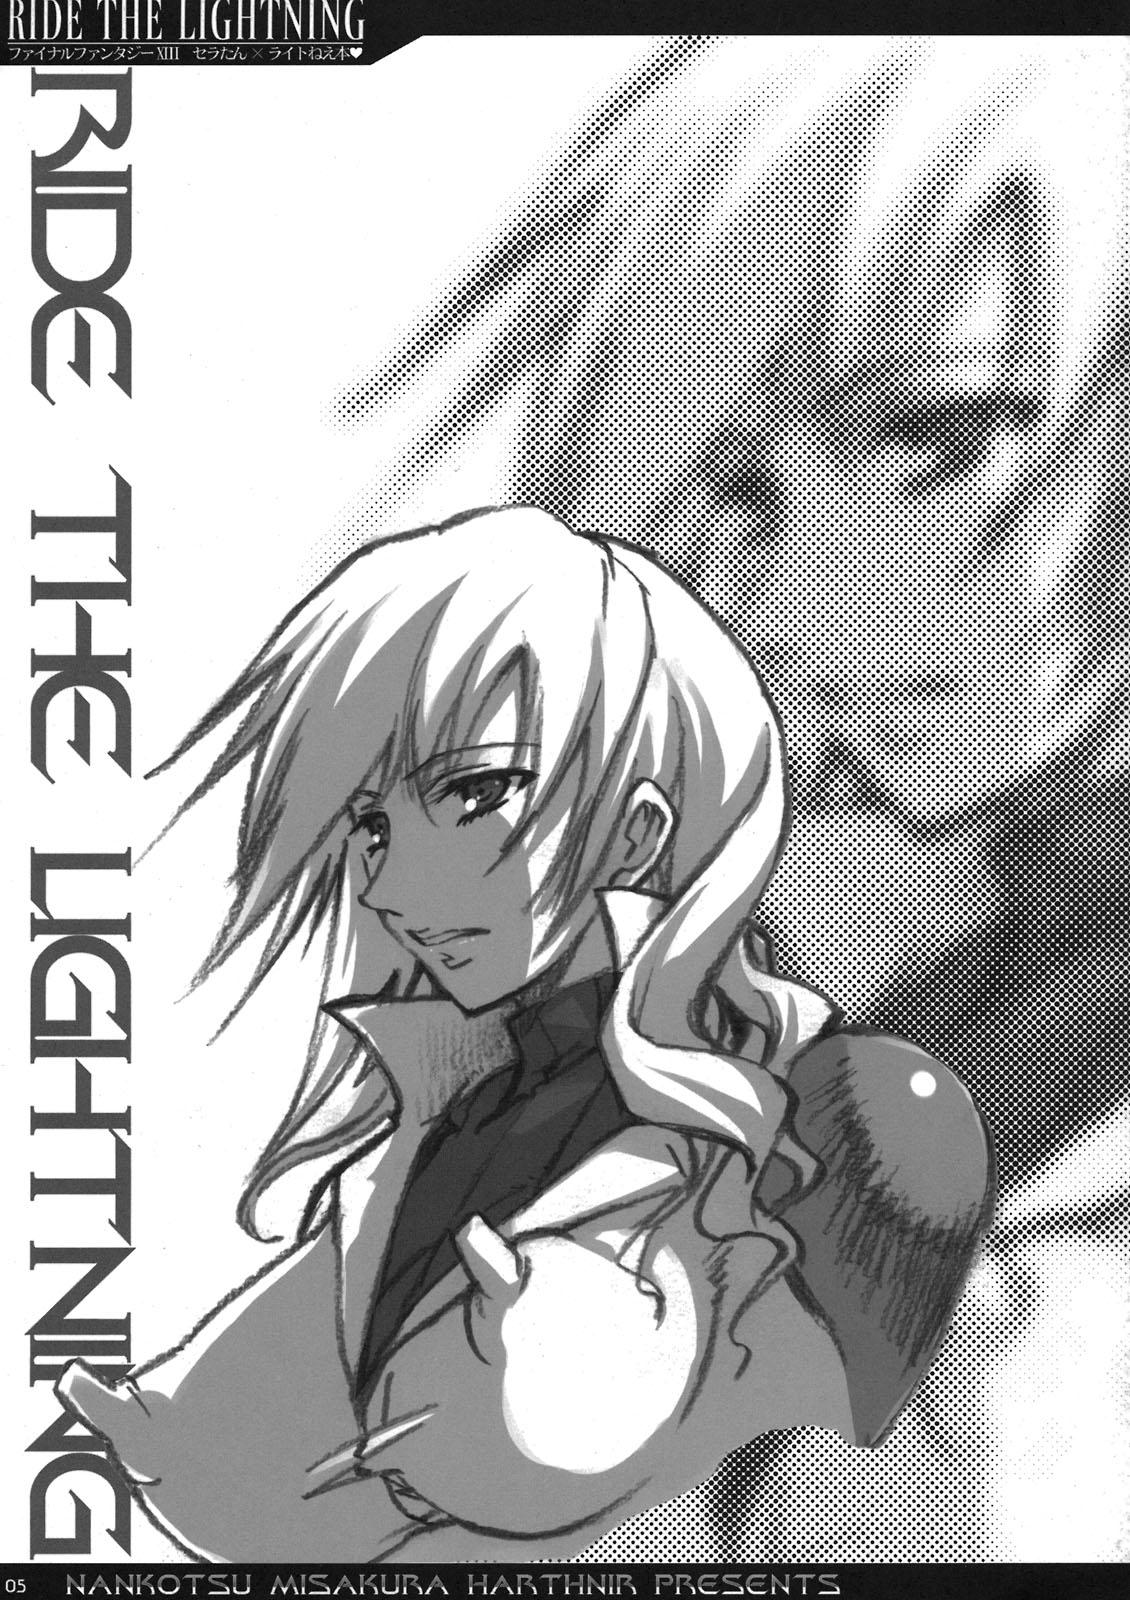 Stud RIDE THE LIGHTNING - Final fantasy xiii Free Amature Porn - Page 5